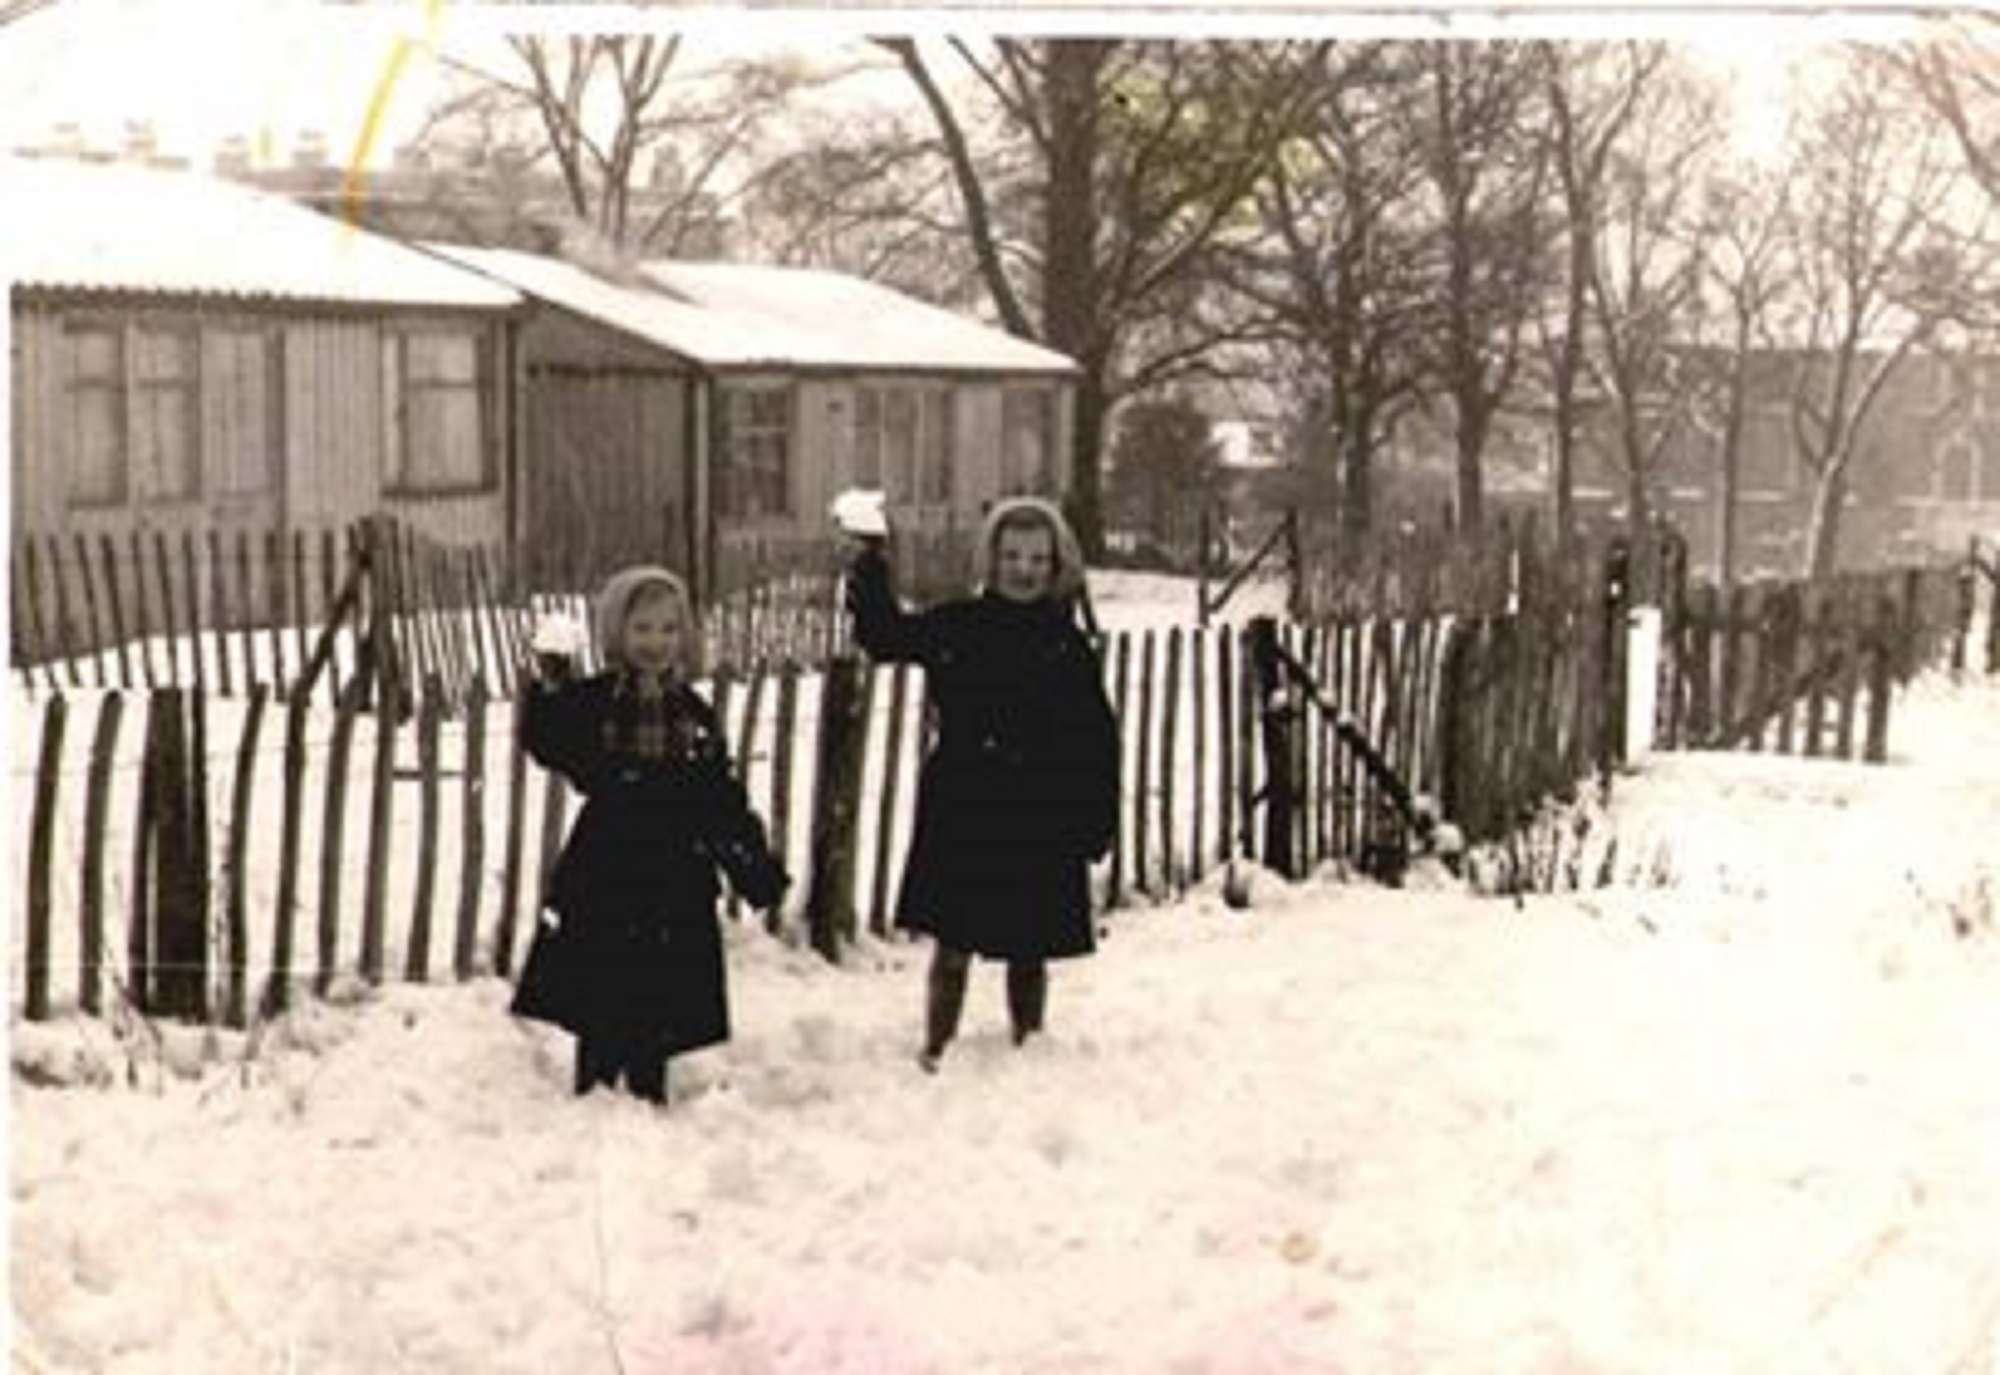 Brenda Anderson and Jeannette Anderson in the snow. Hollyhedge Bungalows, Blackheath SE3